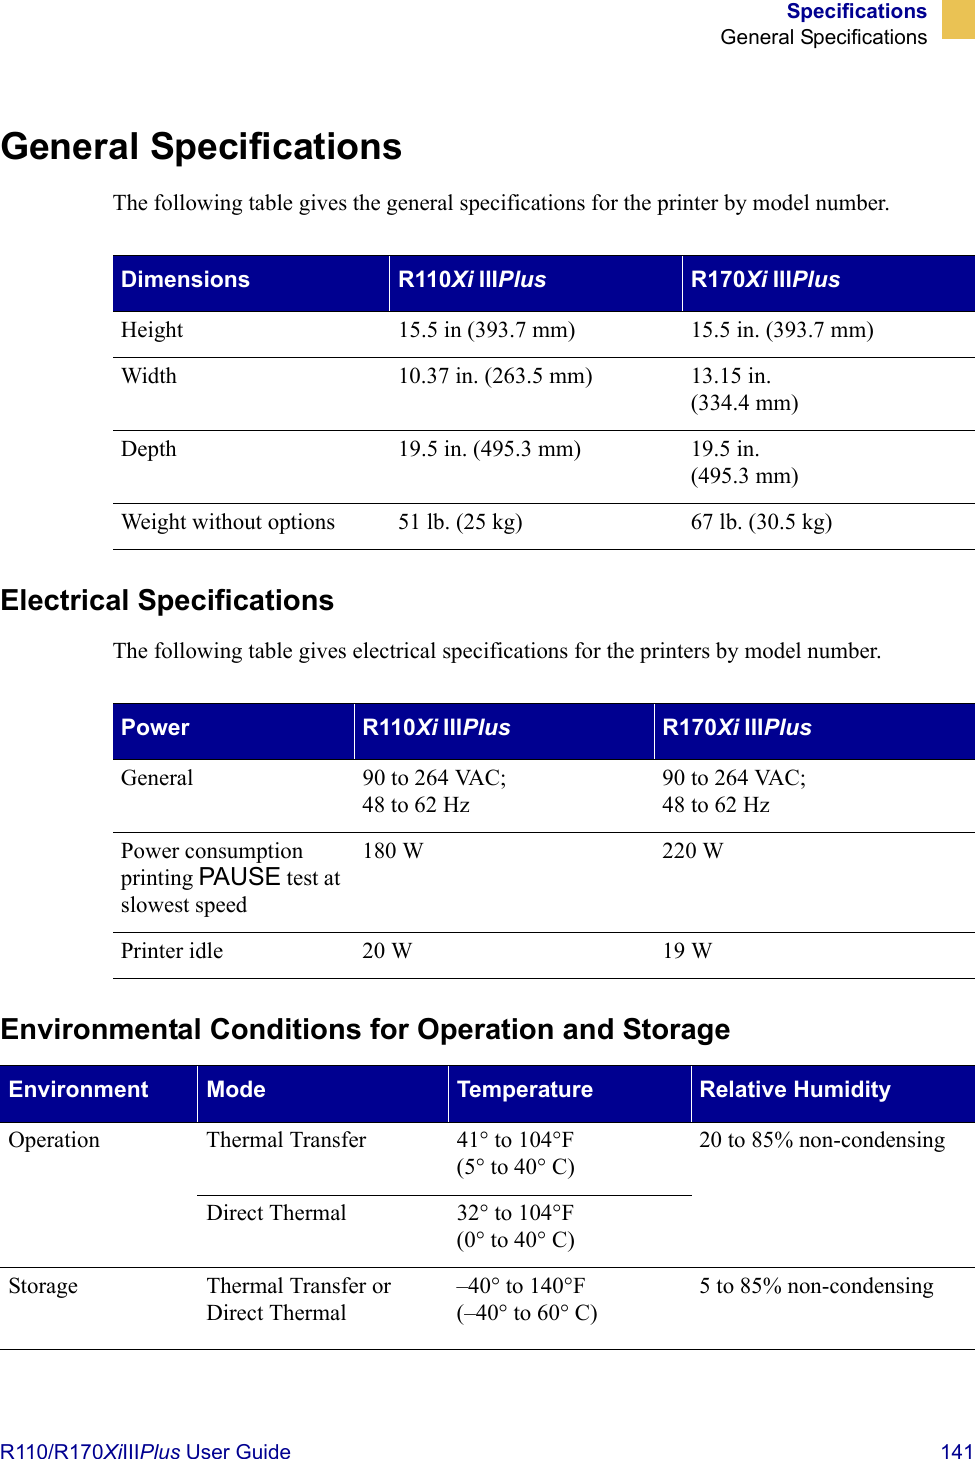 SpecificationsGeneral SpecificationsR110/R170XiIIIPlus User Guide  141General SpecificationsThe following table gives the general specifications for the printer by model number.Electrical SpecificationsThe following table gives electrical specifications for the printers by model number.Environmental Conditions for Operation and StorageDimensions R110Xi IIIPlus R170Xi IIIPlusHeight 15.5 in (393.7 mm) 15.5 in. (393.7 mm)Width 10.37 in. (263.5 mm) 13.15 in.(334.4 mm)Depth 19.5 in. (495.3 mm) 19.5 in.(495.3 mm)Weight without options 51 lb. (25 kg) 67 lb. (30.5 kg)Power R110Xi IIIPlus R170Xi IIIPlusGeneral 90 to 264 VAC; 48 to 62 Hz90 to 264 VAC; 48 to 62 HzPower consumption printing PAUSE test at slowest speed180 W 220 WPrinter idle 20 W 19 WEnvironment Mode Temperature Relative HumidityOperation Thermal Transfer 41° to 104°F(5° to 40° C)20 to 85% non-condensingDirect Thermal 32° to 104°F(0° to 40° C)Storage Thermal Transfer or Direct Thermal–40° to 140°F(–40° to 60° C)5 to 85% non-condensing